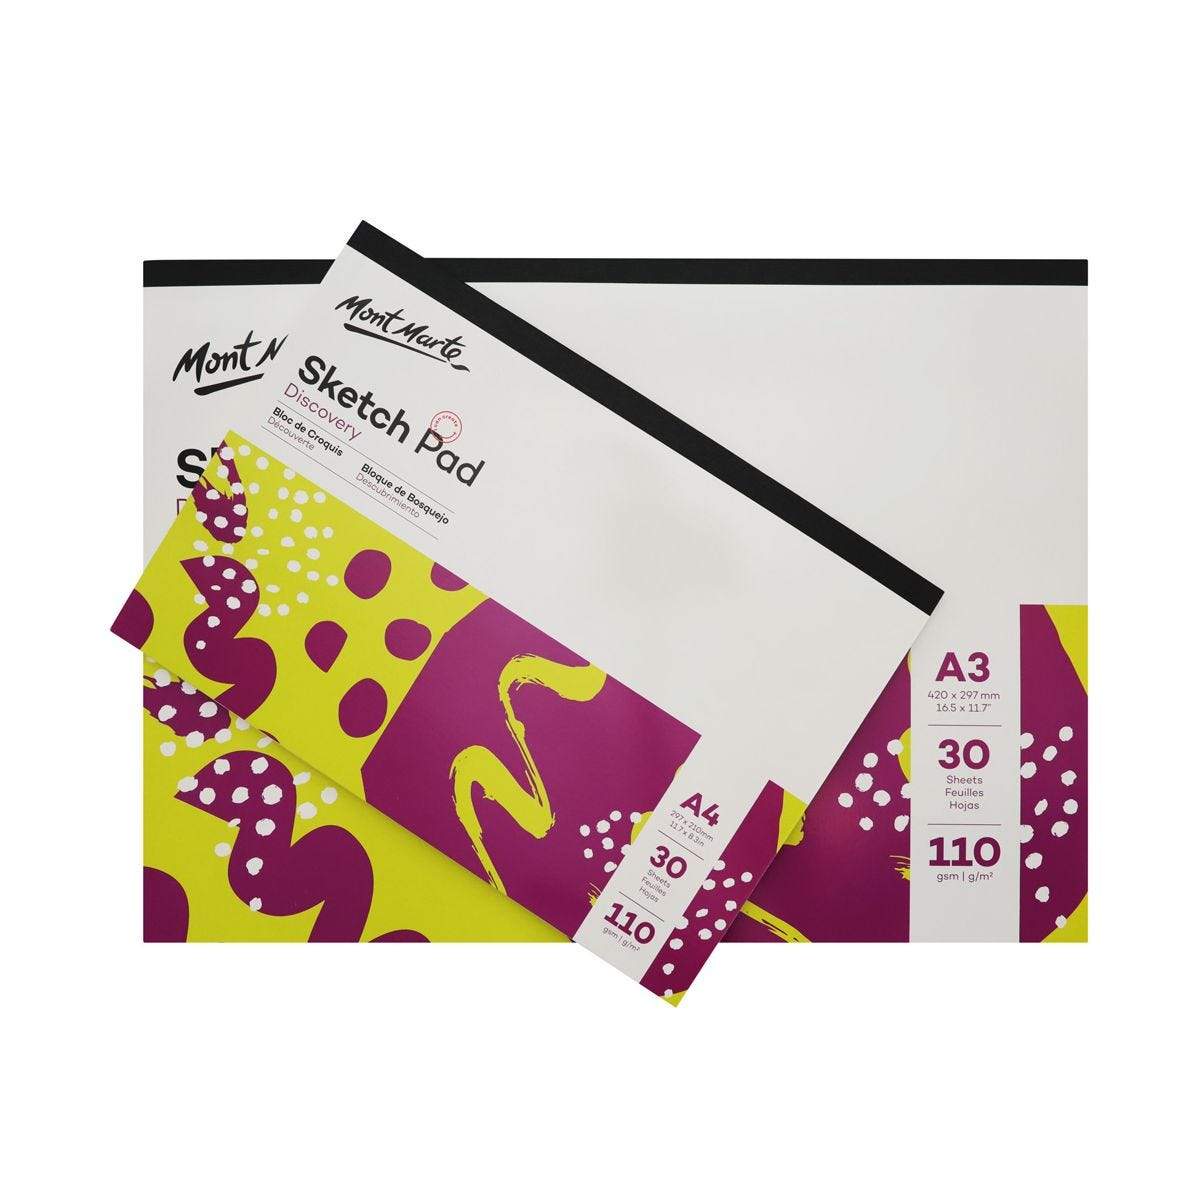 Discovery Sketch Pad 30 sheets 110gsm